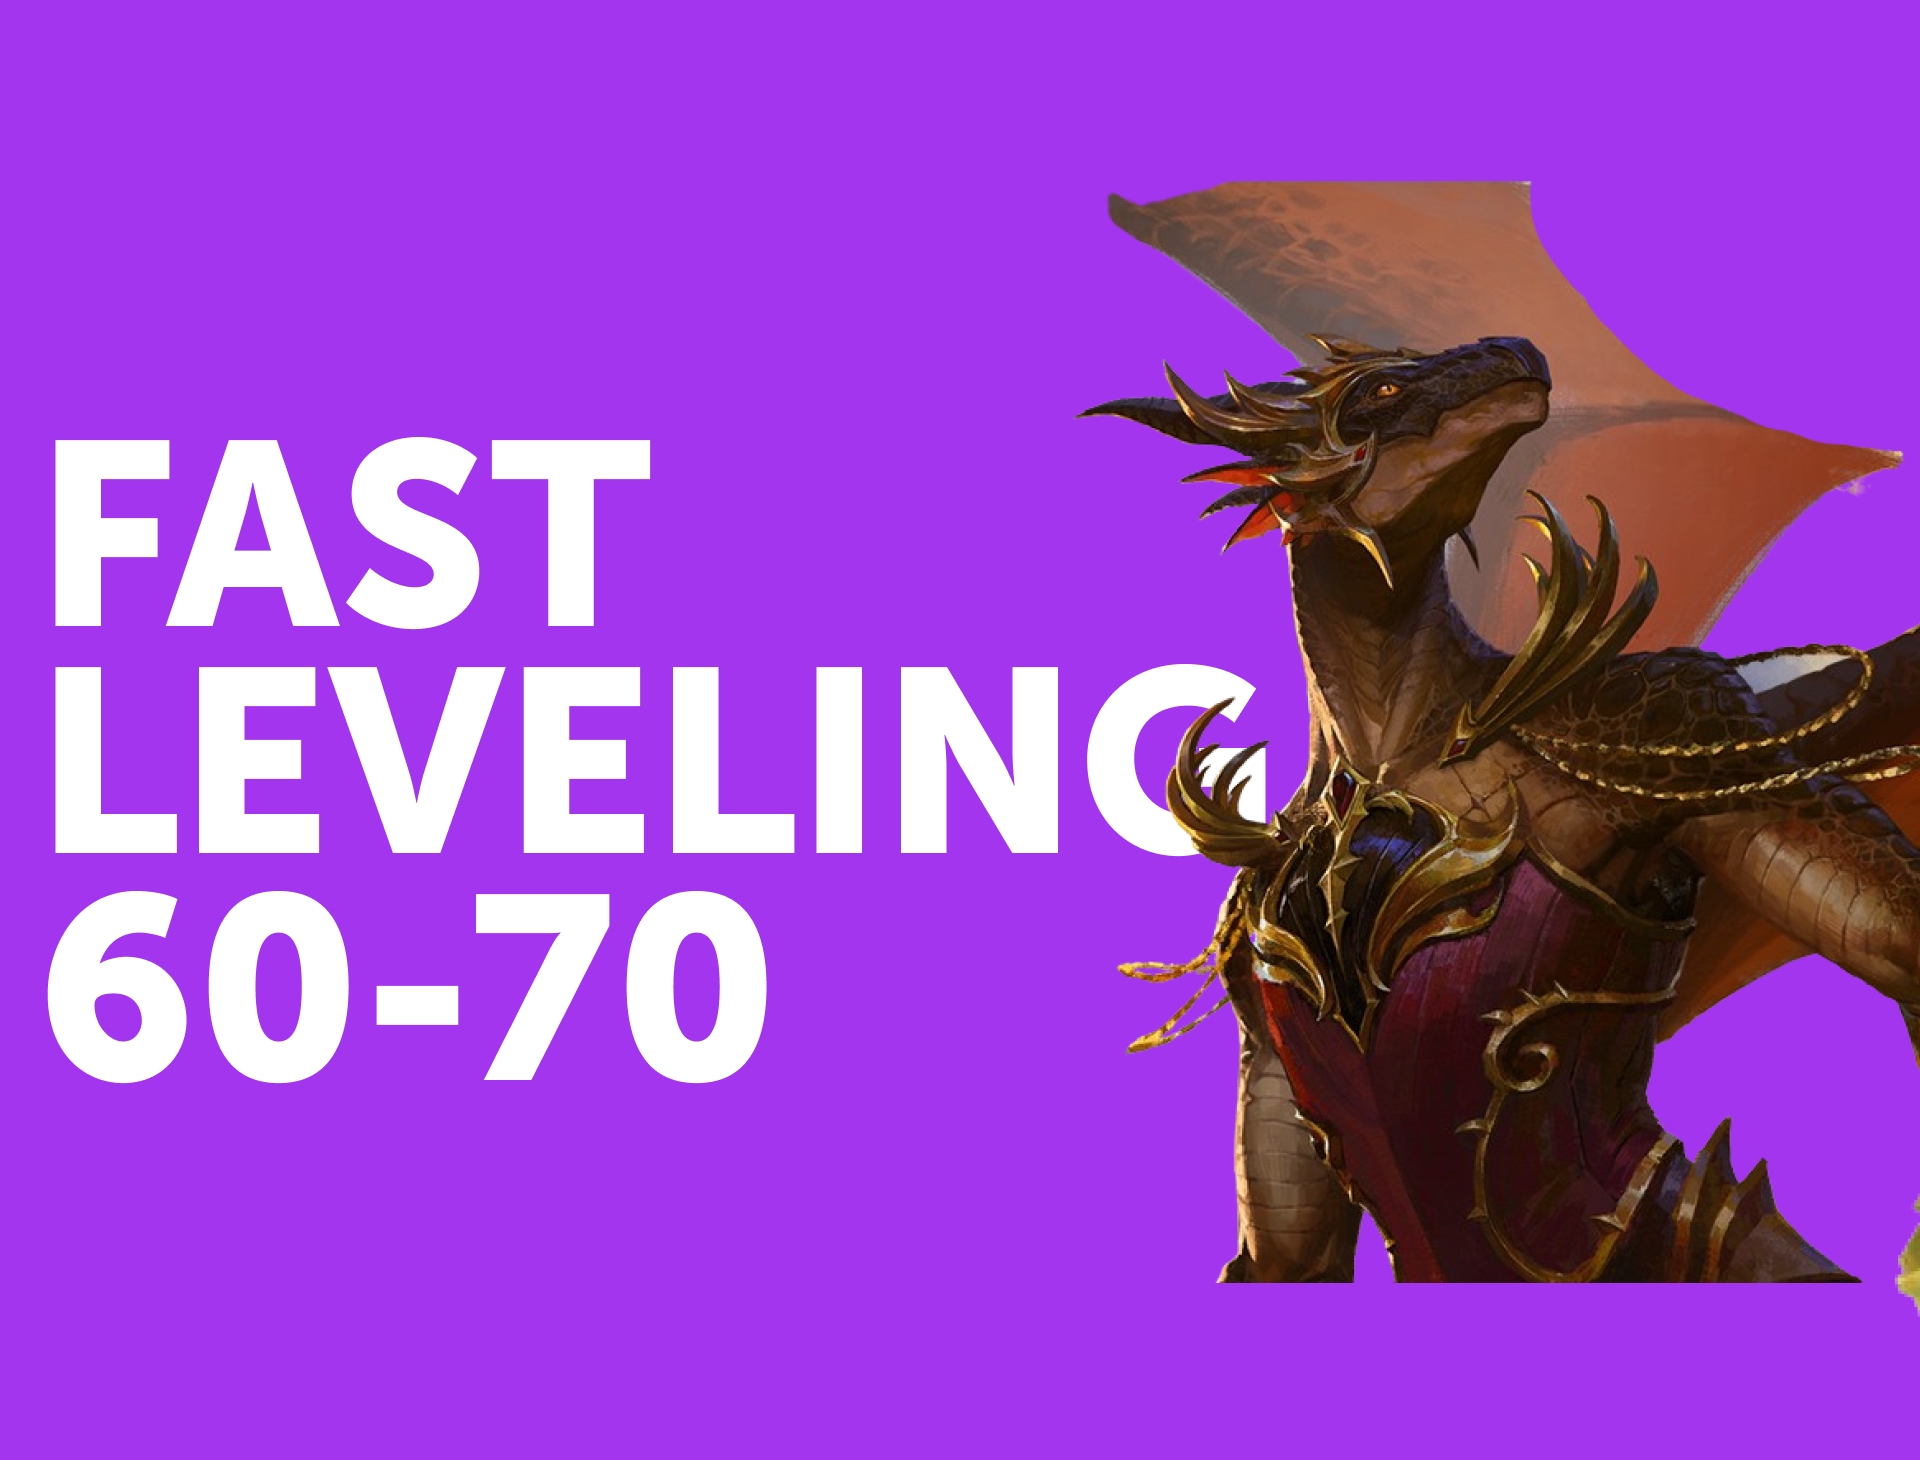 Dragonflight Fast Leveling 60-70 in 12 hours